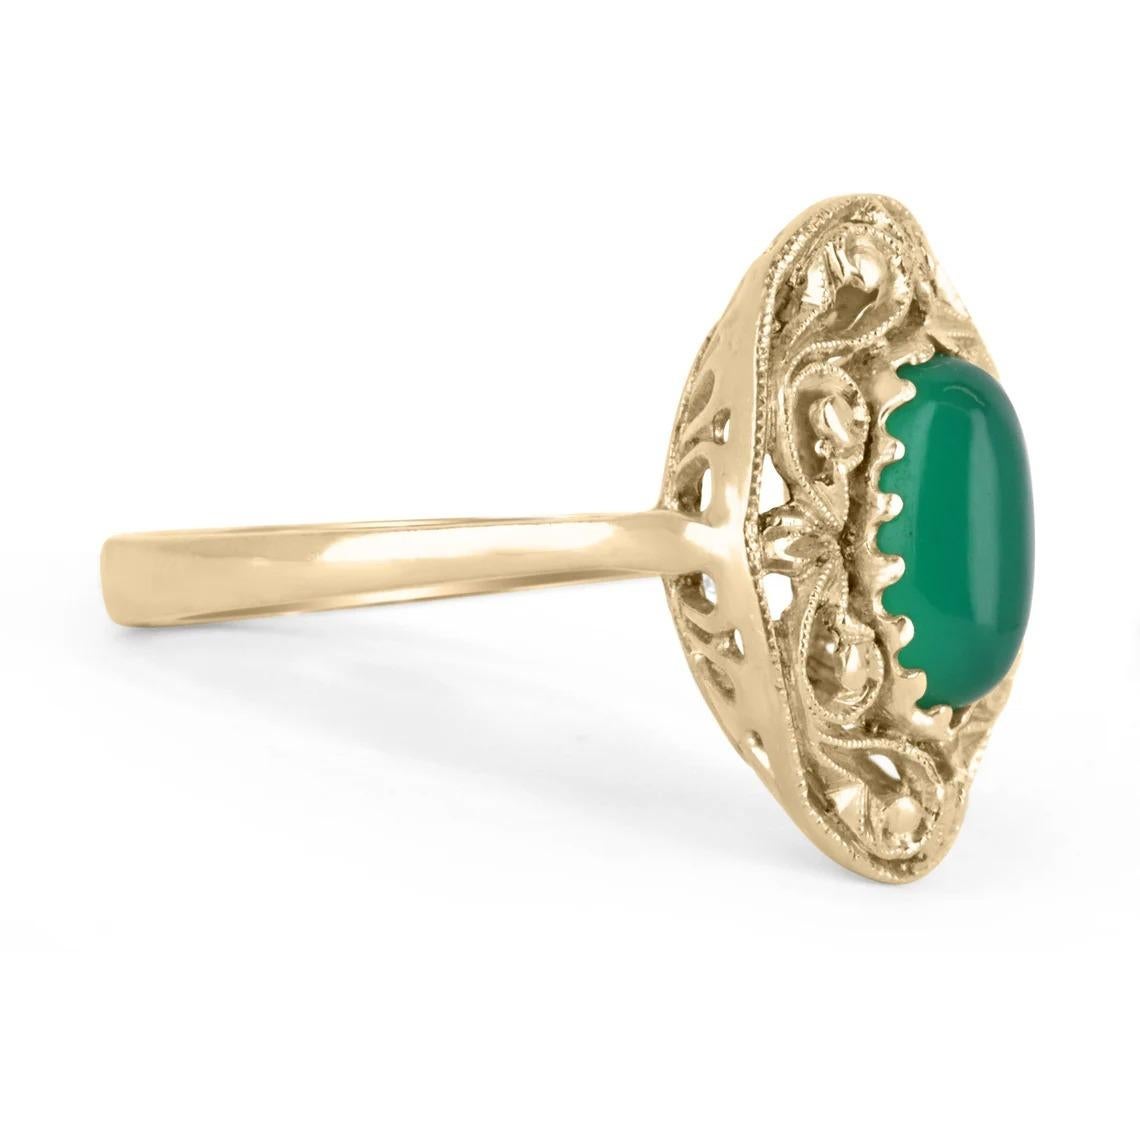 Featured is this exquisite emerald cabochon solitaire handcrafted and carved ring in 18K solid gold. The rare beautiful center stone has a full 2.03-carats of a natural emerald cabochon with a dark yellowish-green color. This elongated stone is